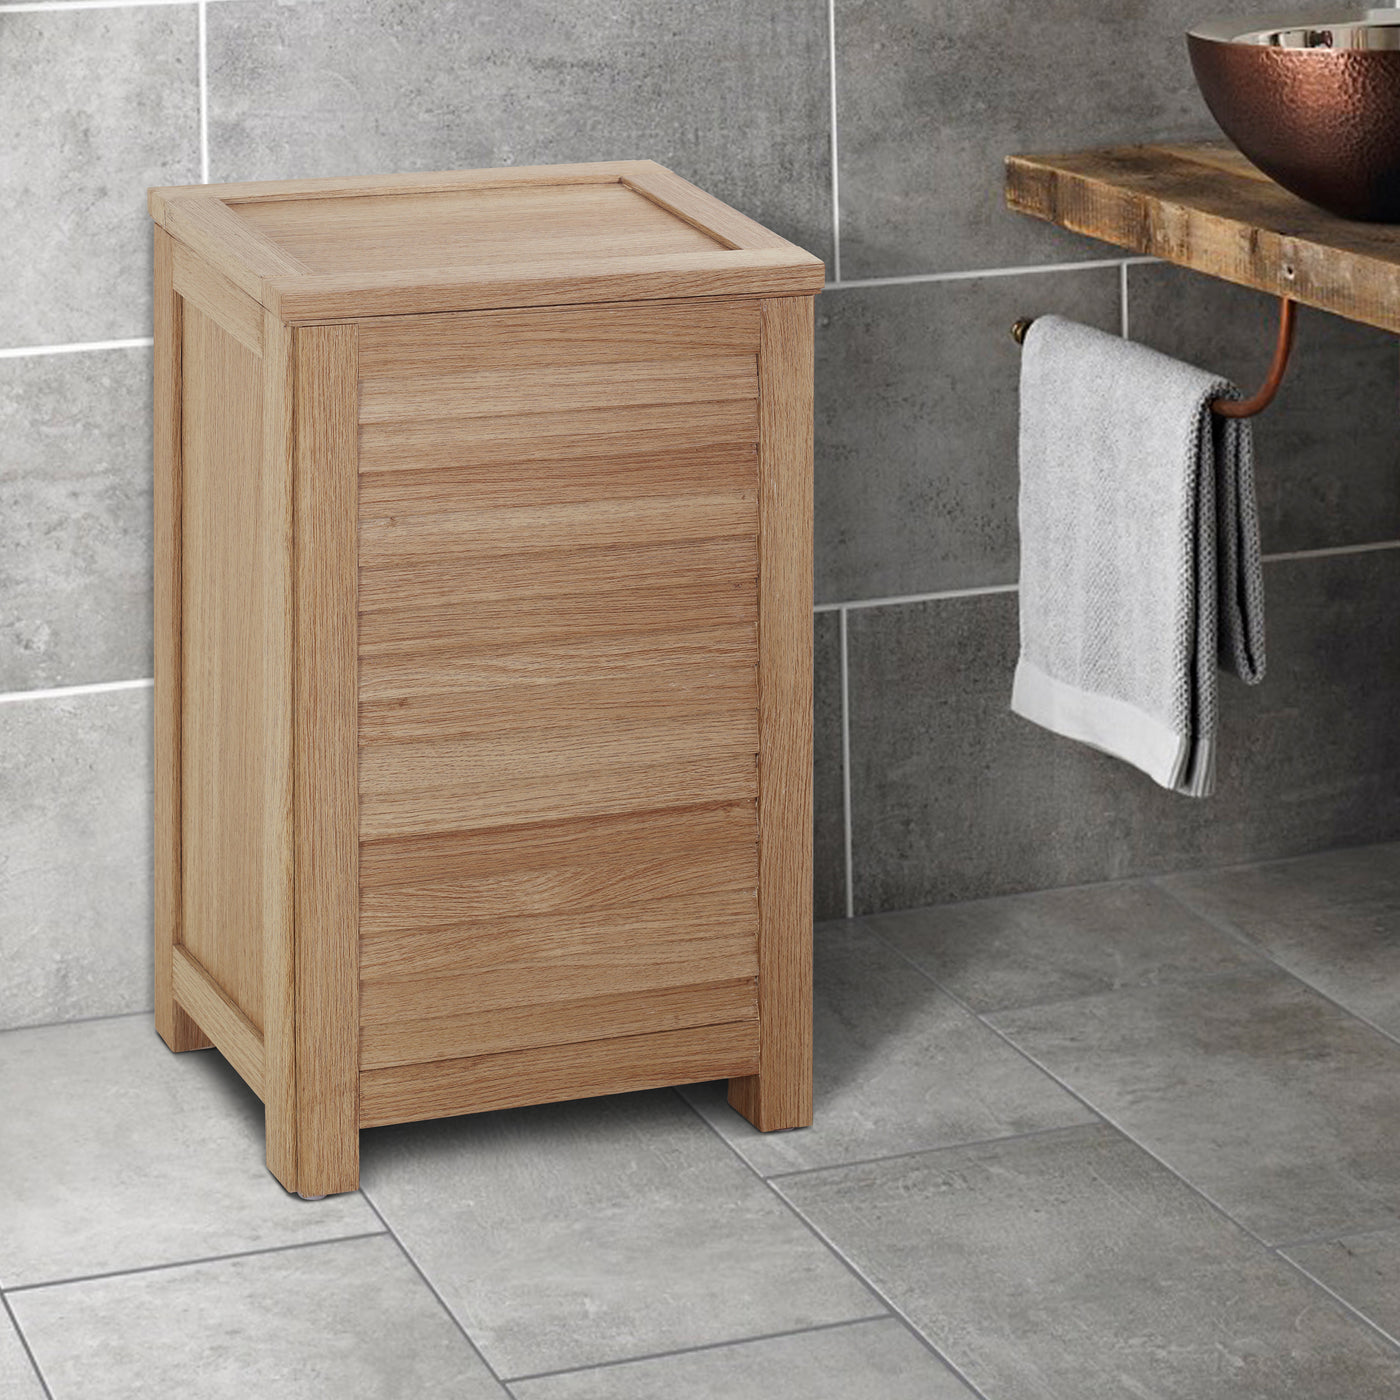 WOODEN LAUNDRY BASKETS